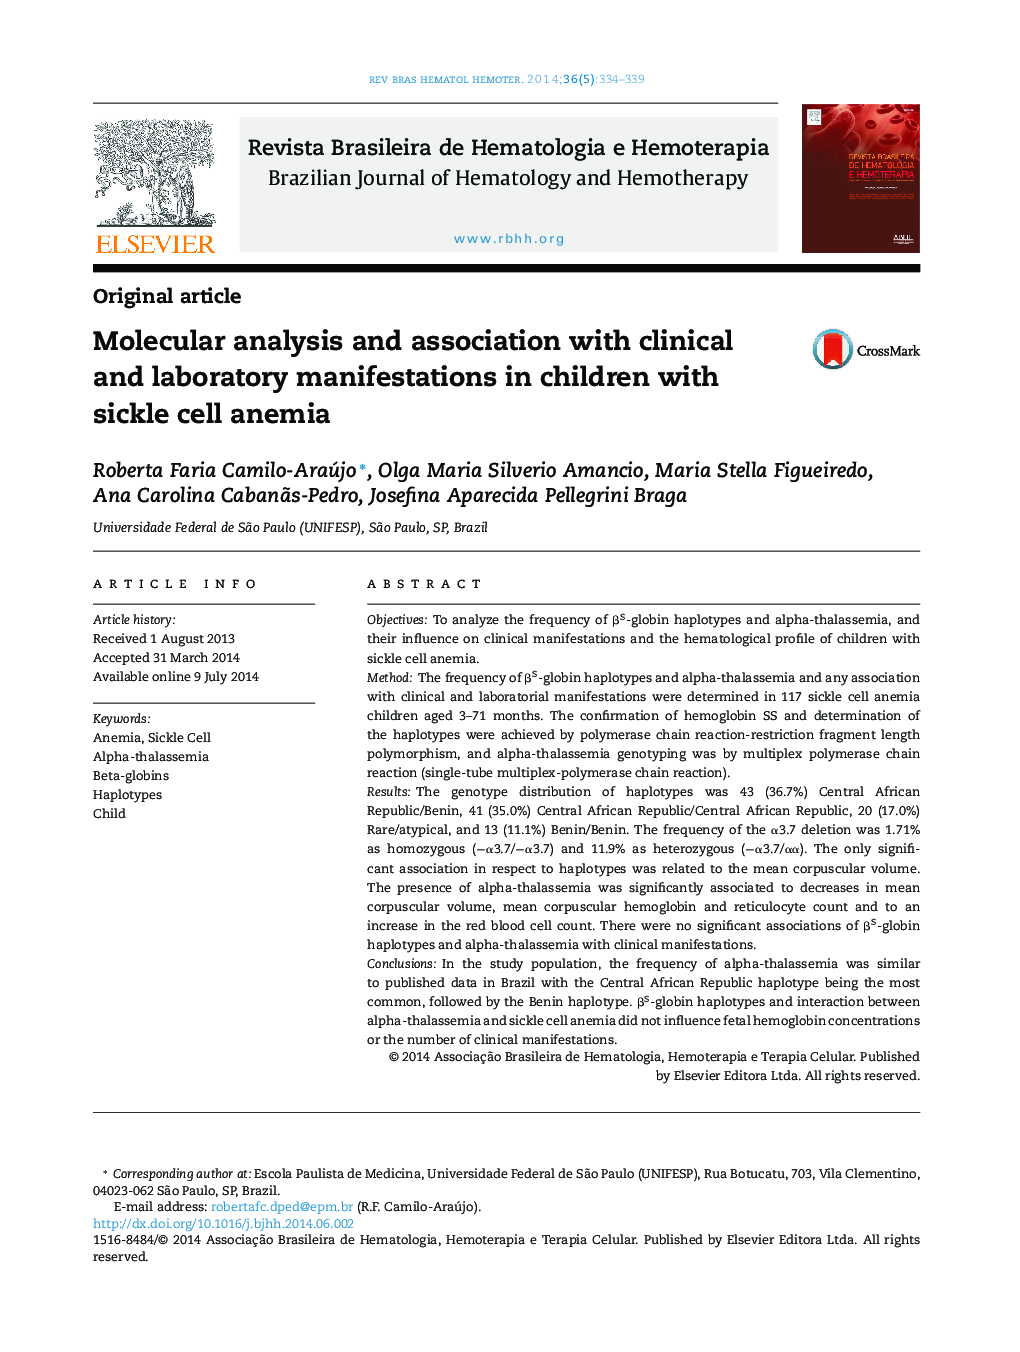 Molecular analysis and association with clinical and laboratory manifestations in children with sickle cell anemia